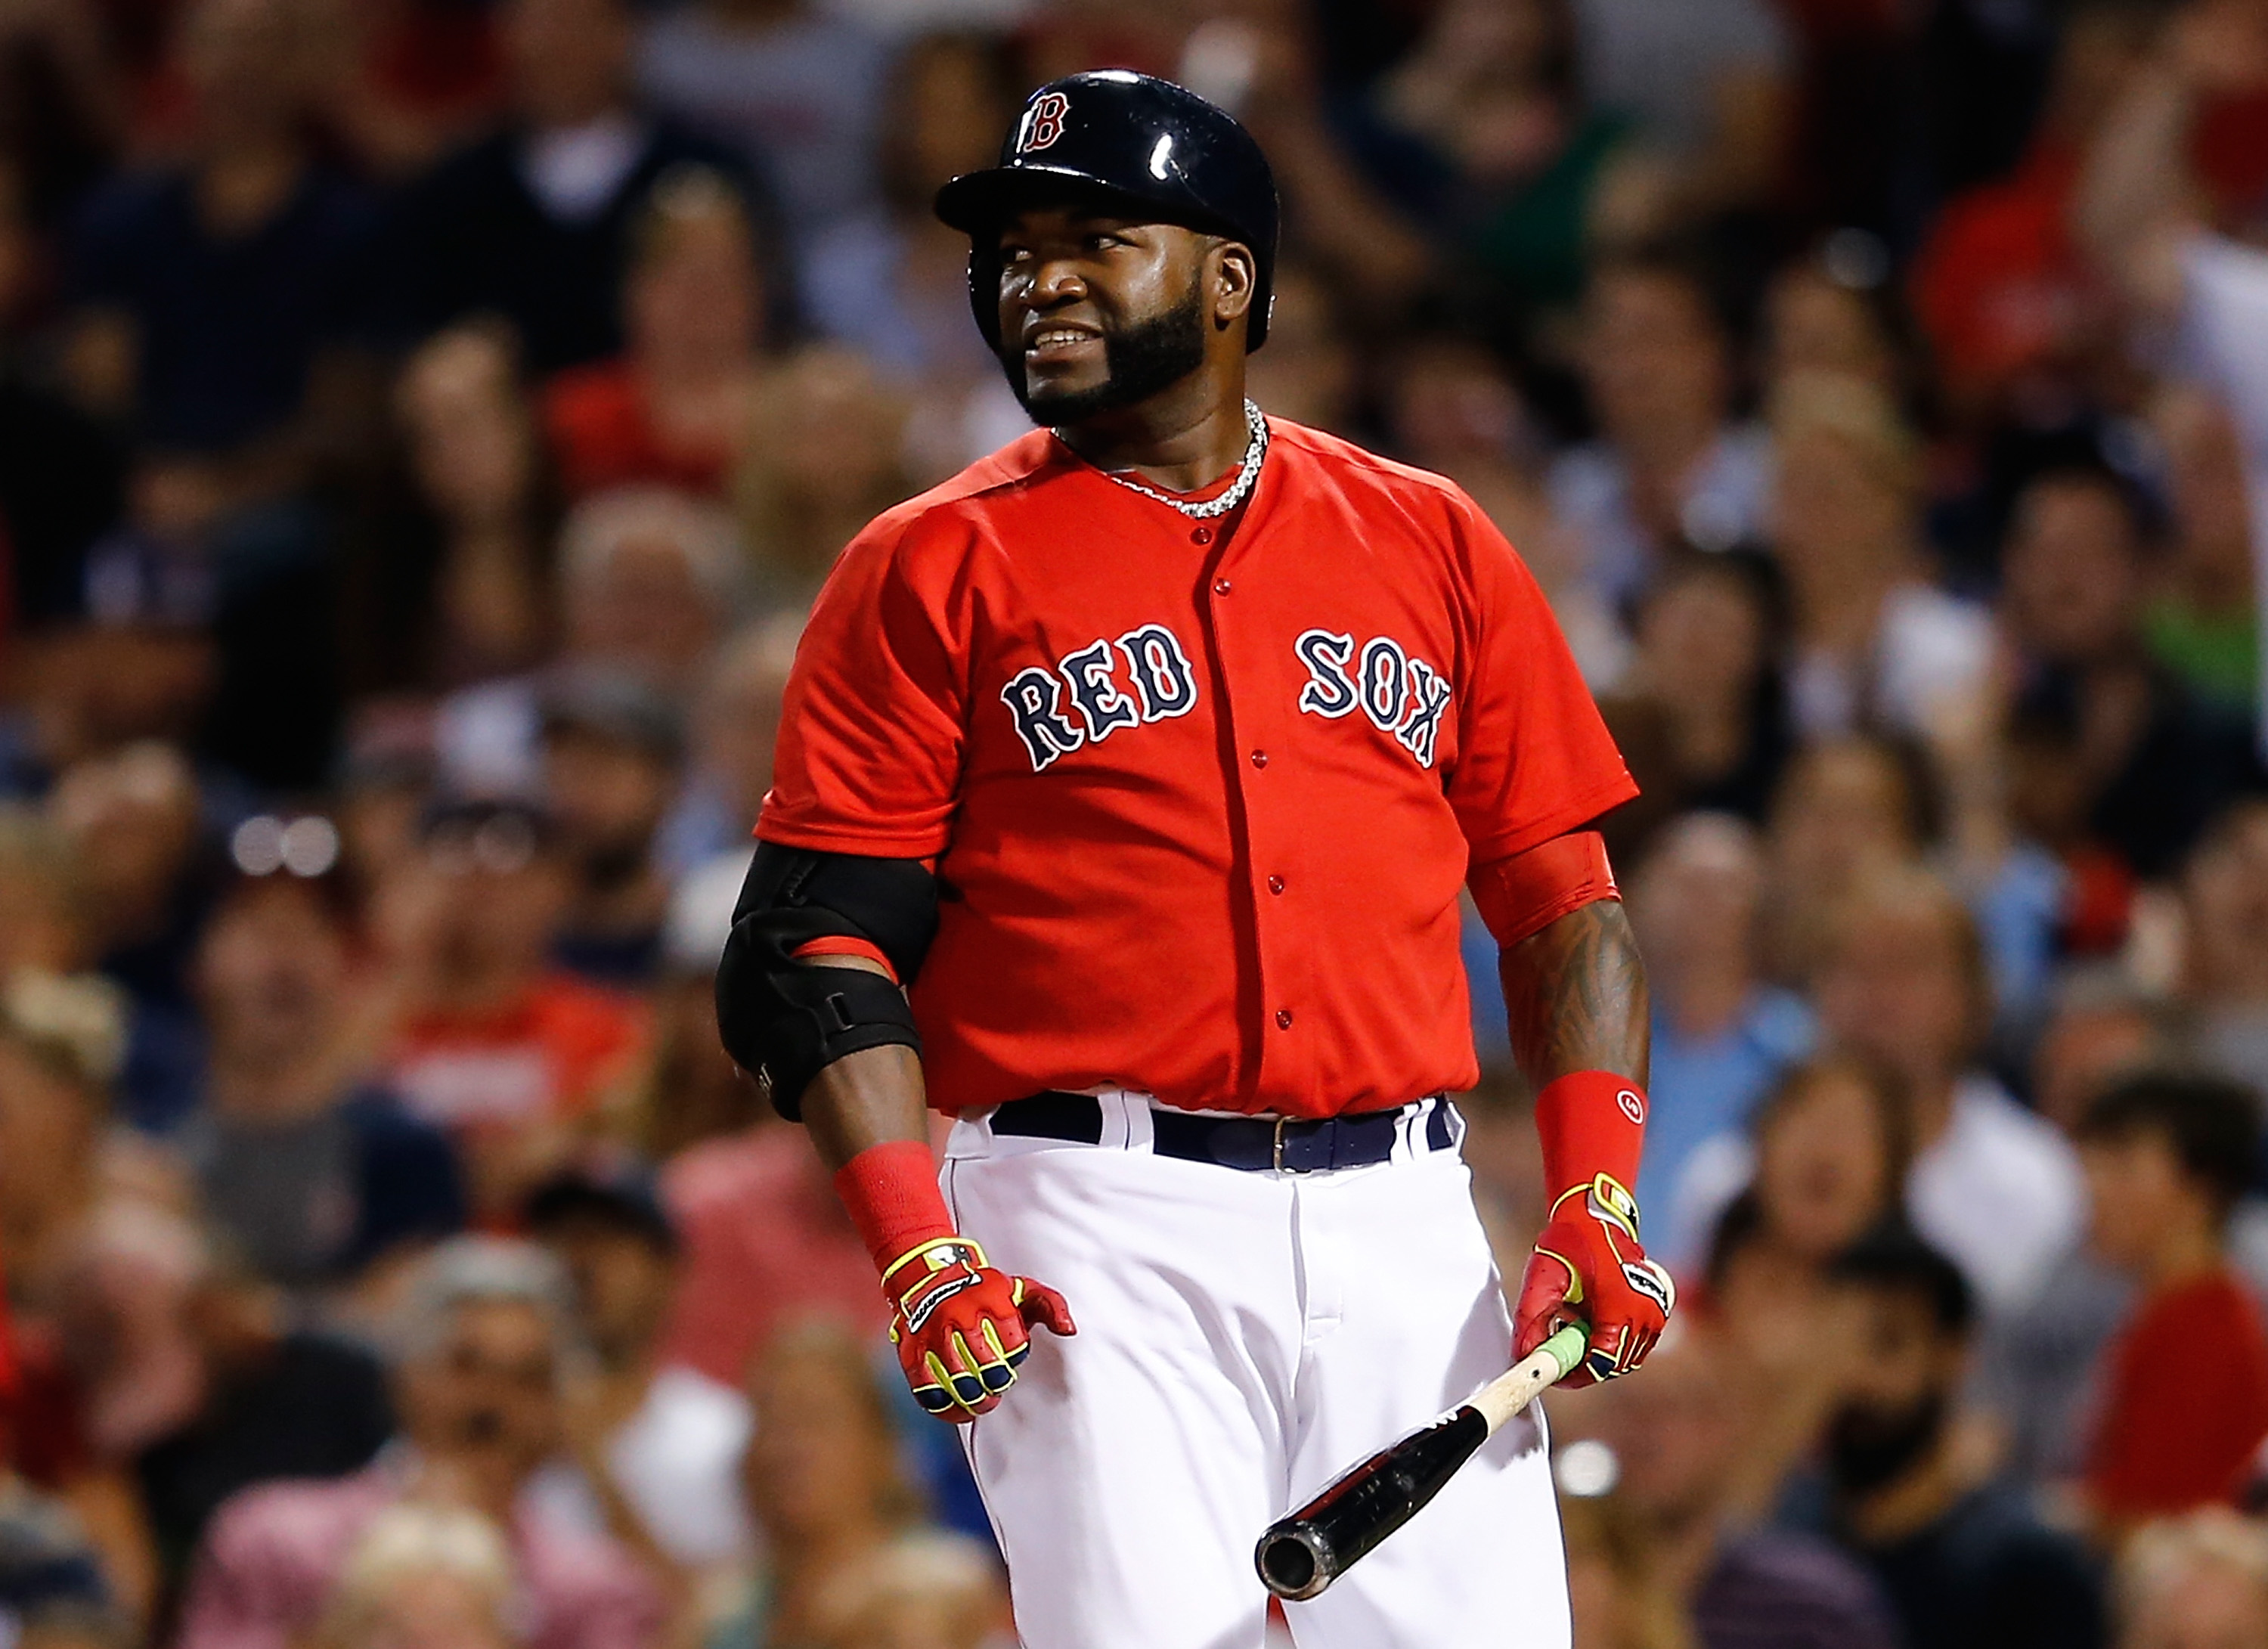 David Ortiz: 5 Fast Facts You Need to Know